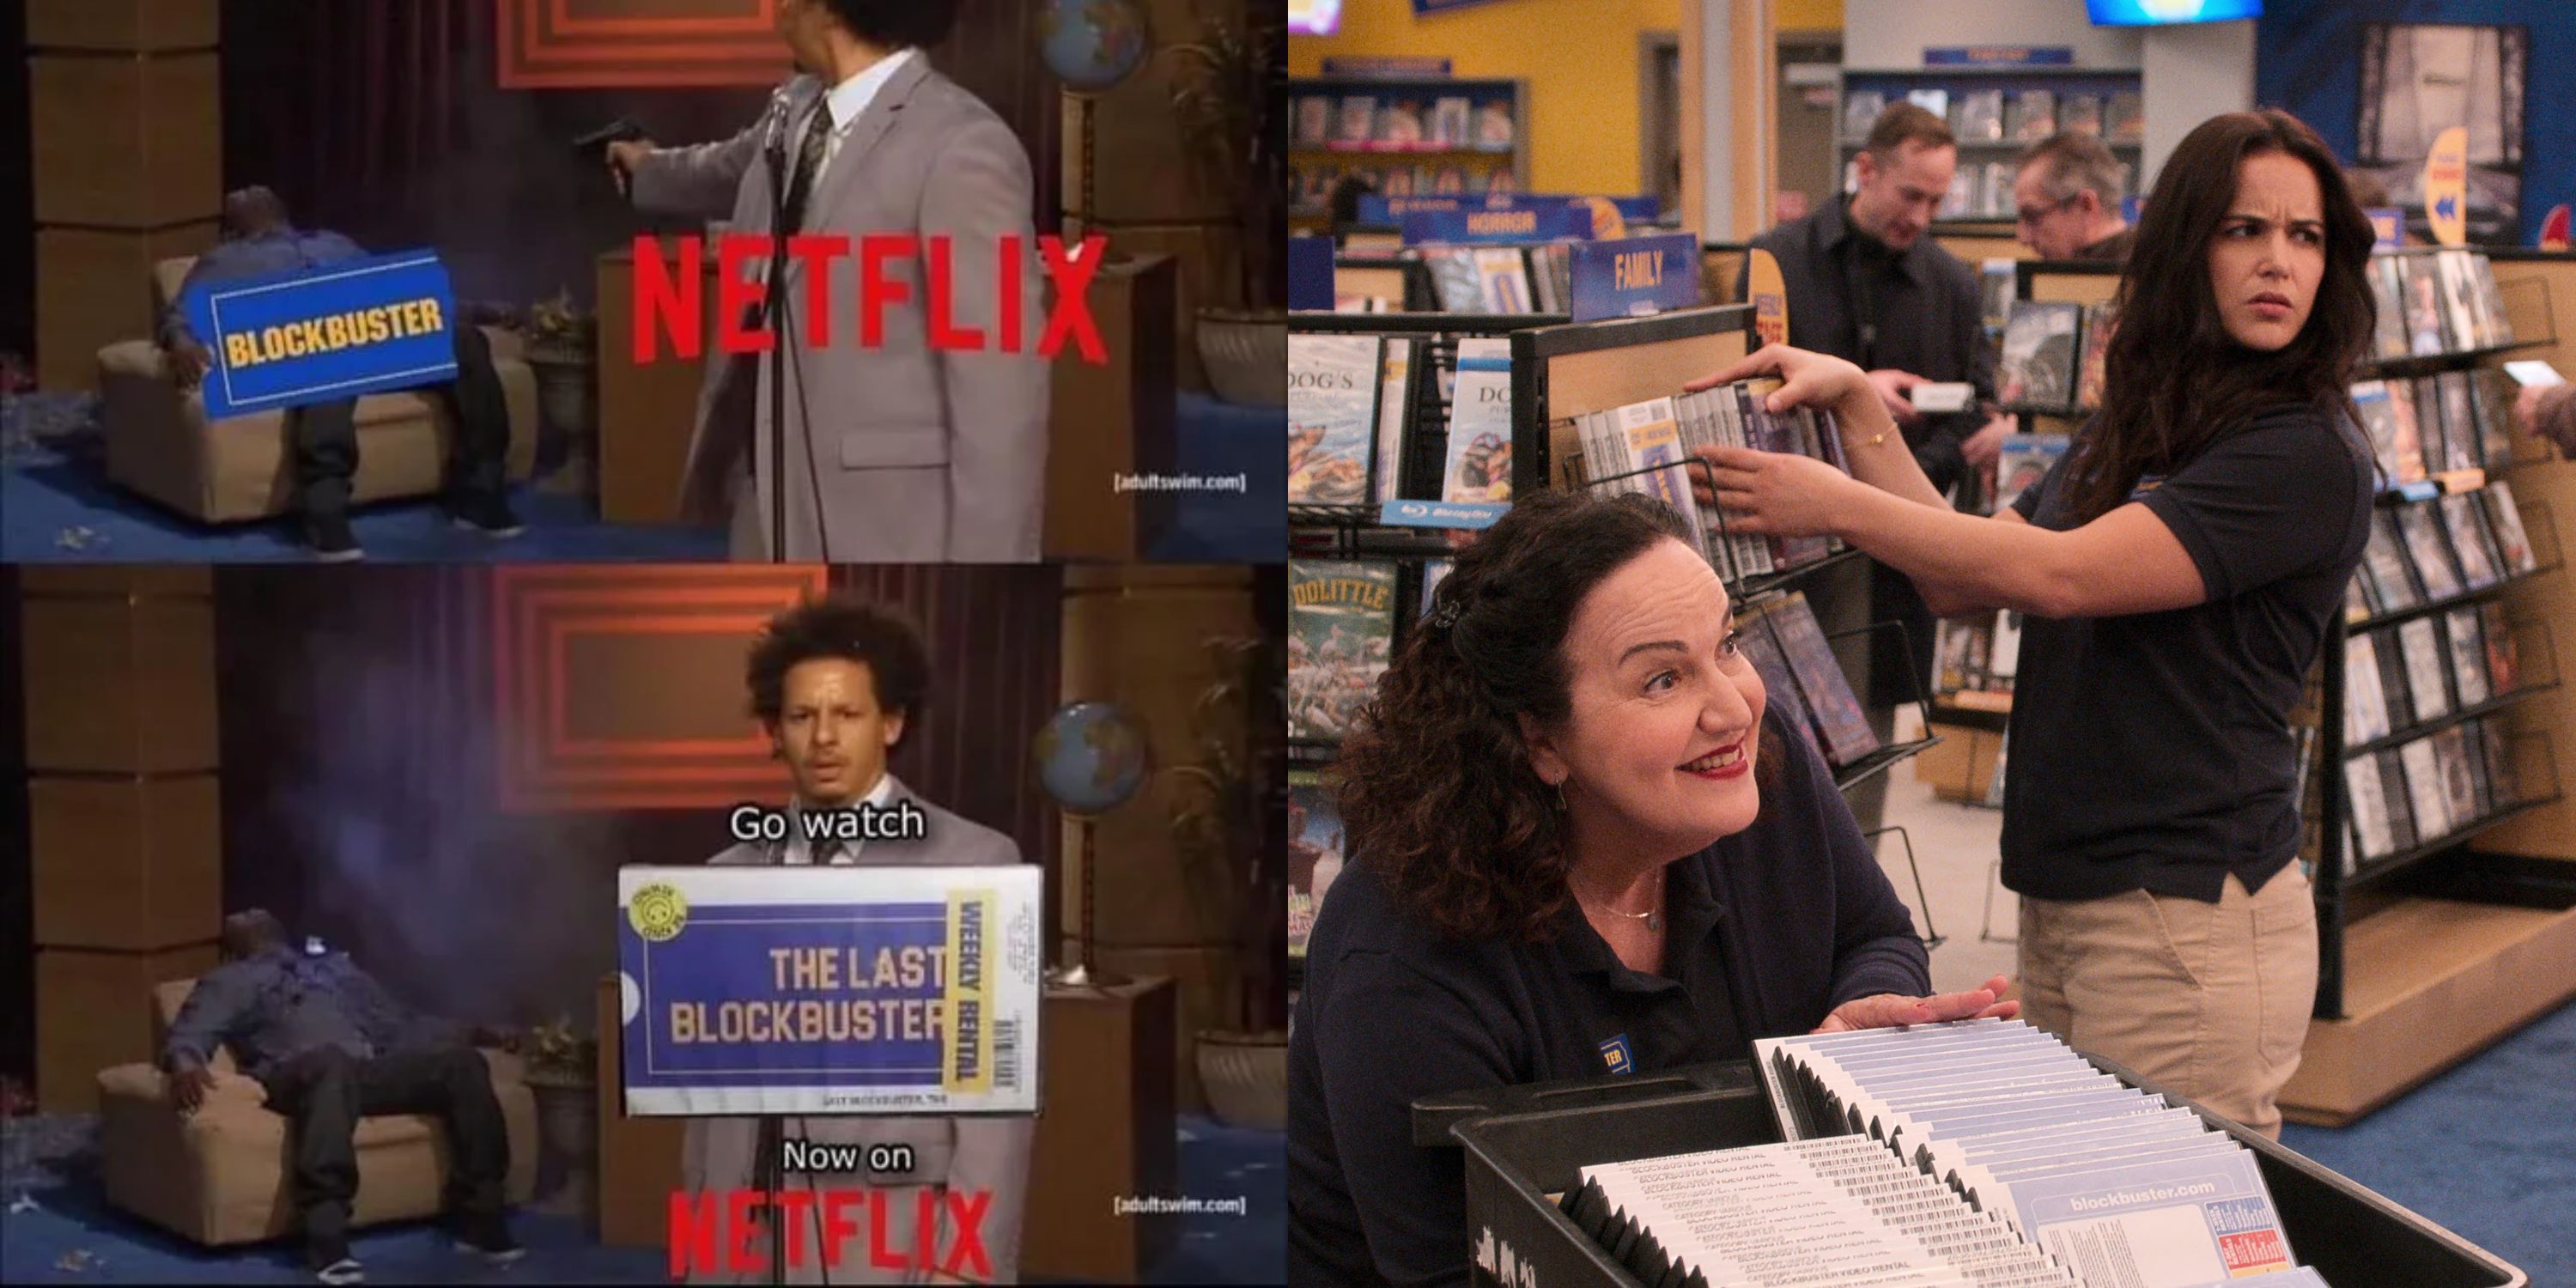 10 Hilarious Blockbuster Memes To Laugh At Before The Netflix Show